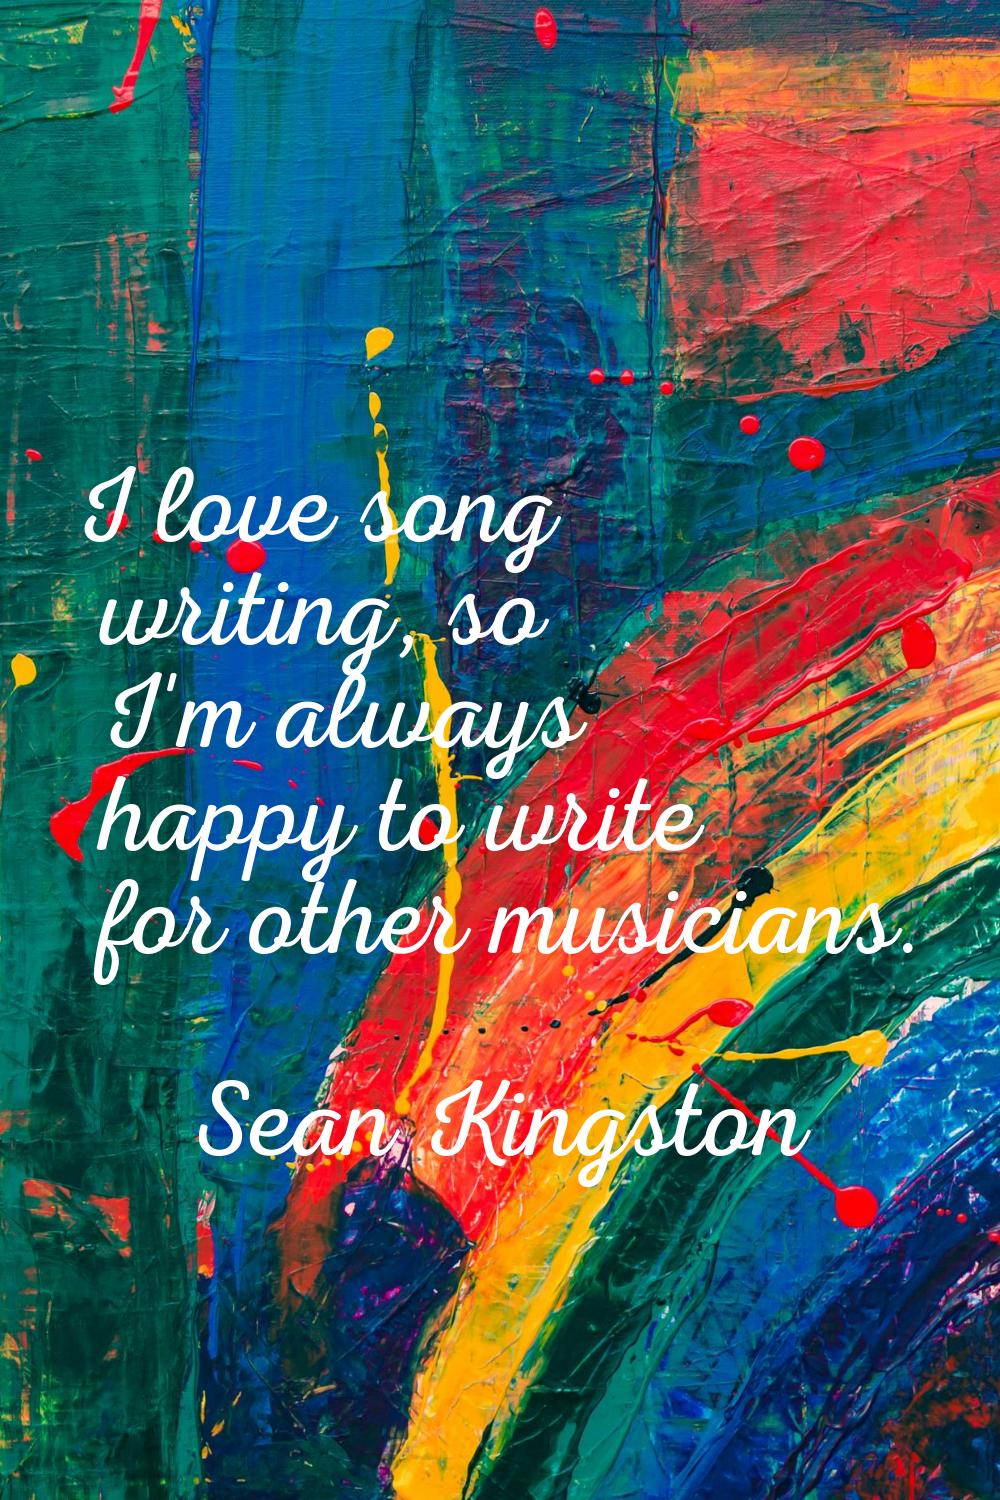 I love song writing, so I'm always happy to write for other musicians.